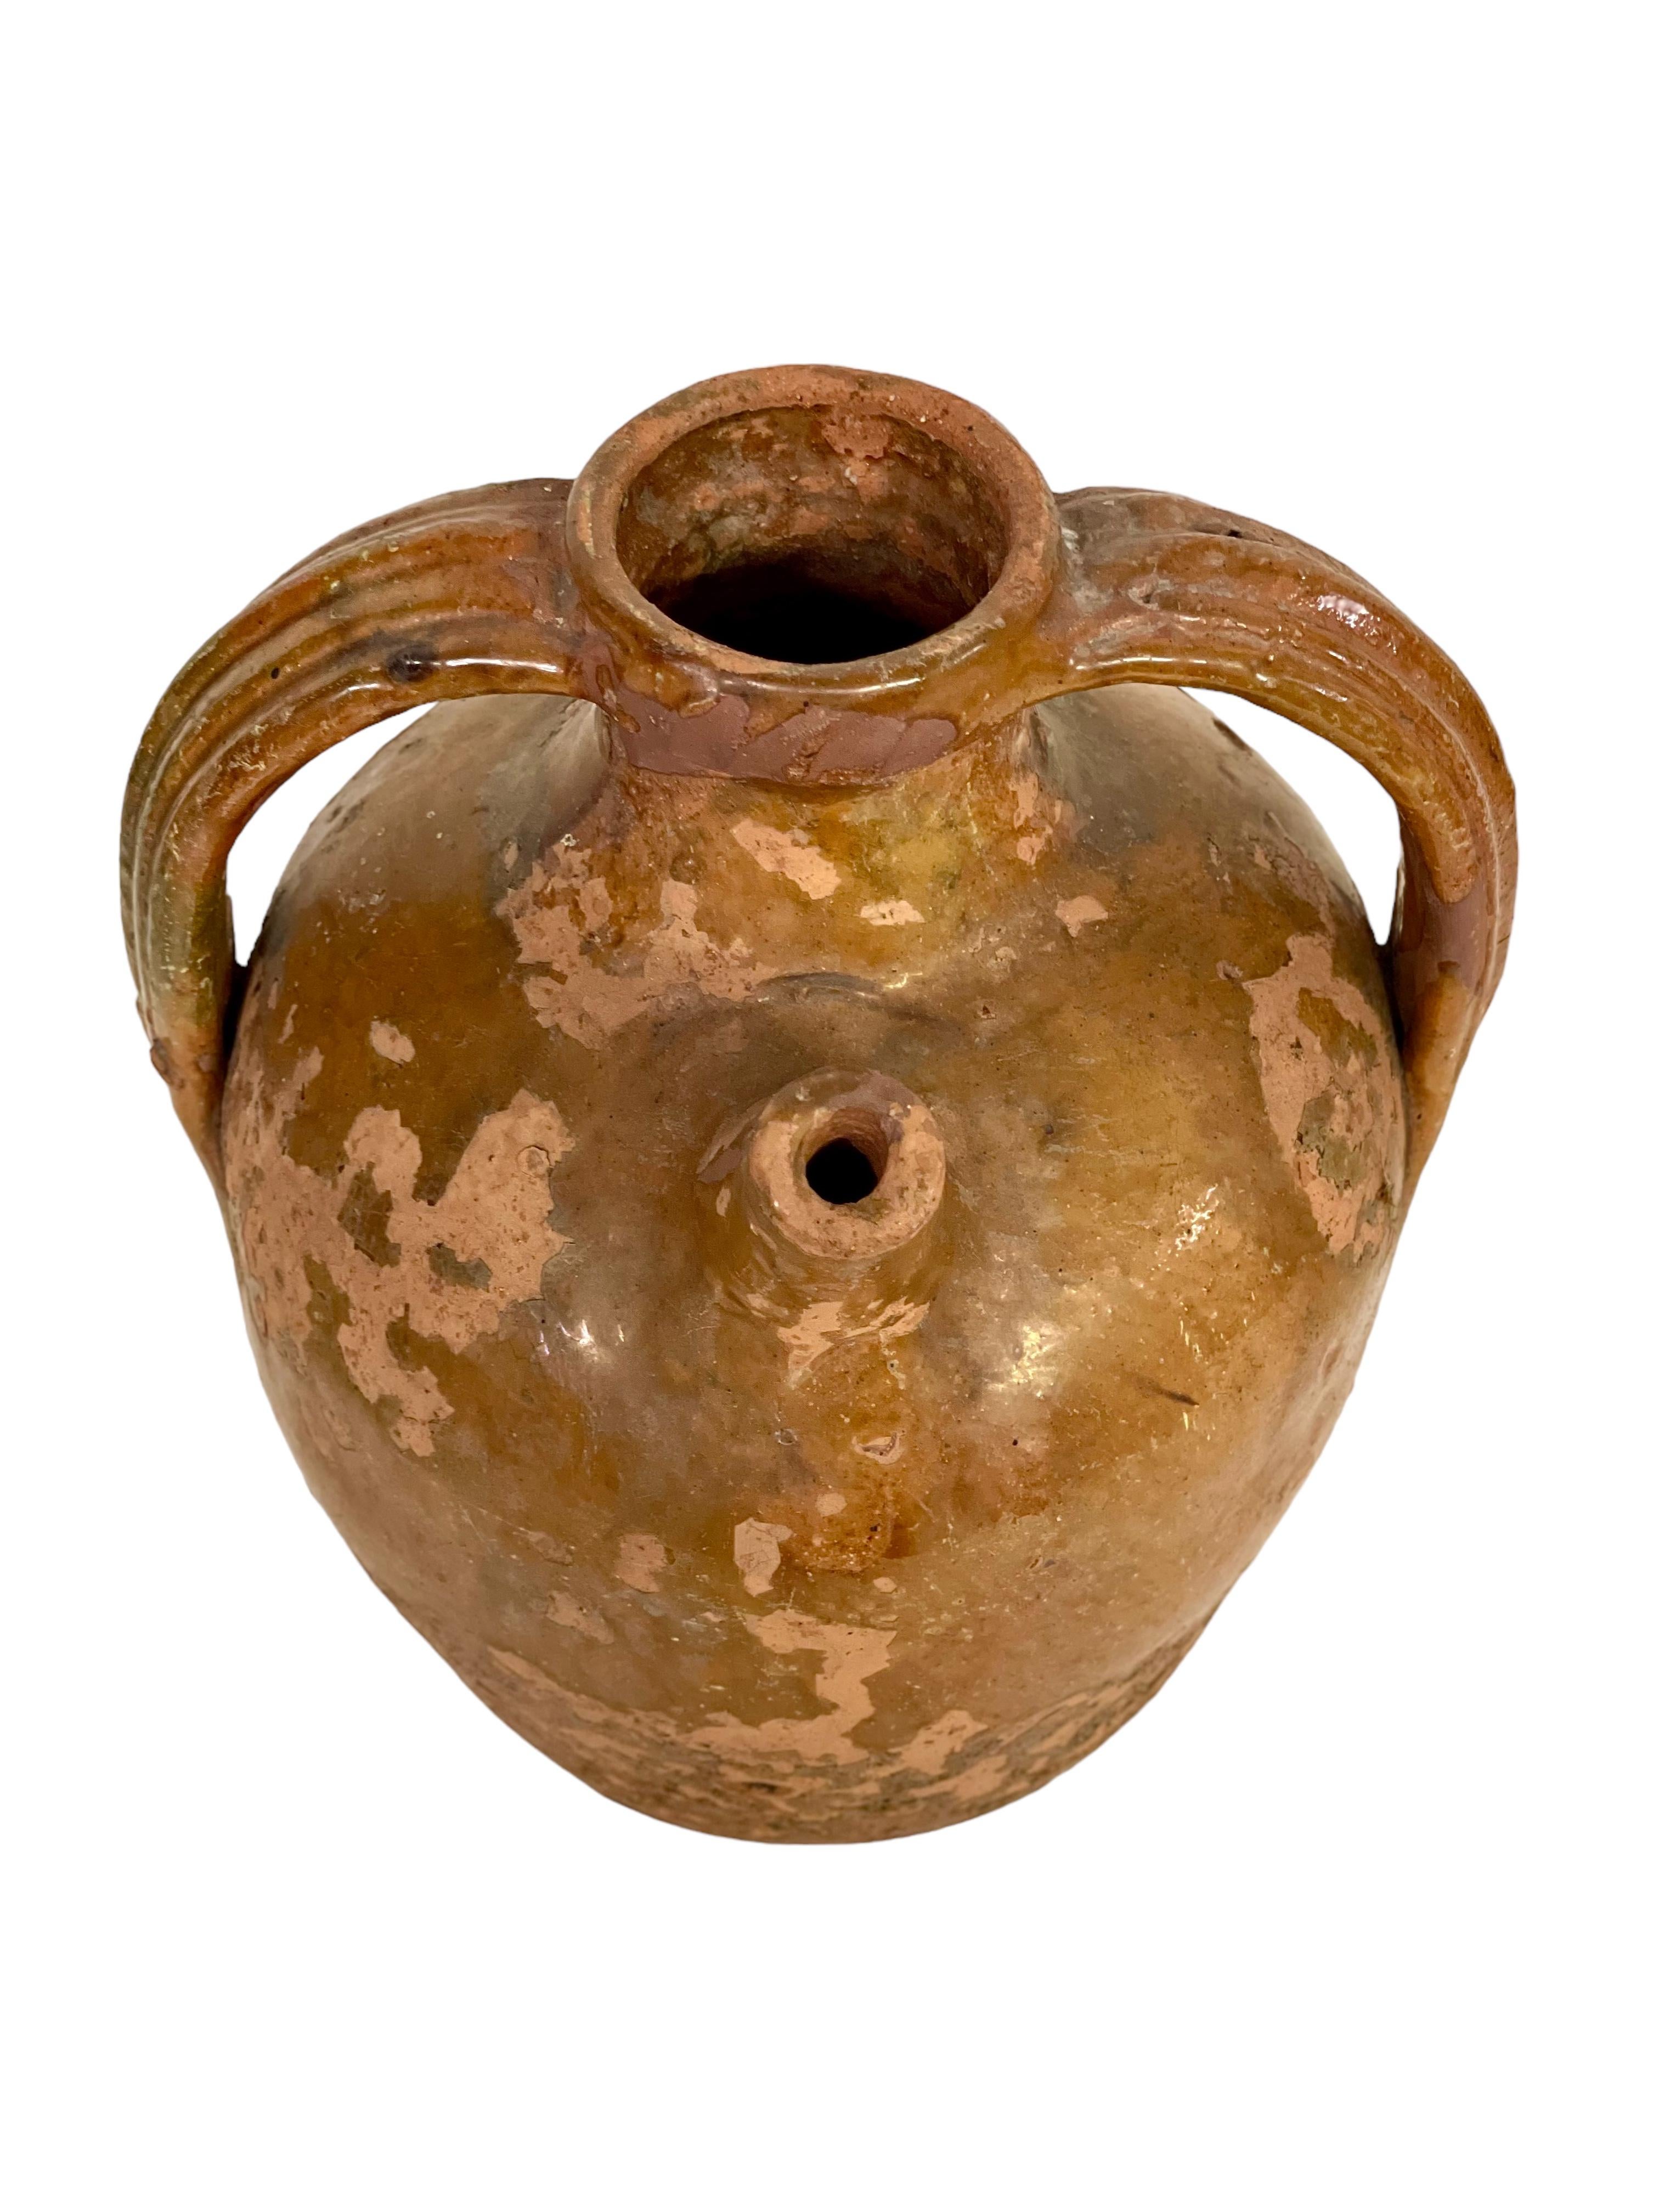 A wonderful antique oil jar, dating from the 19th century, and originating from the South of France. Traditionally shaped, with a short pouring spout and two large side handles, this shapely vessel has been coated with a gorgeous green and brown